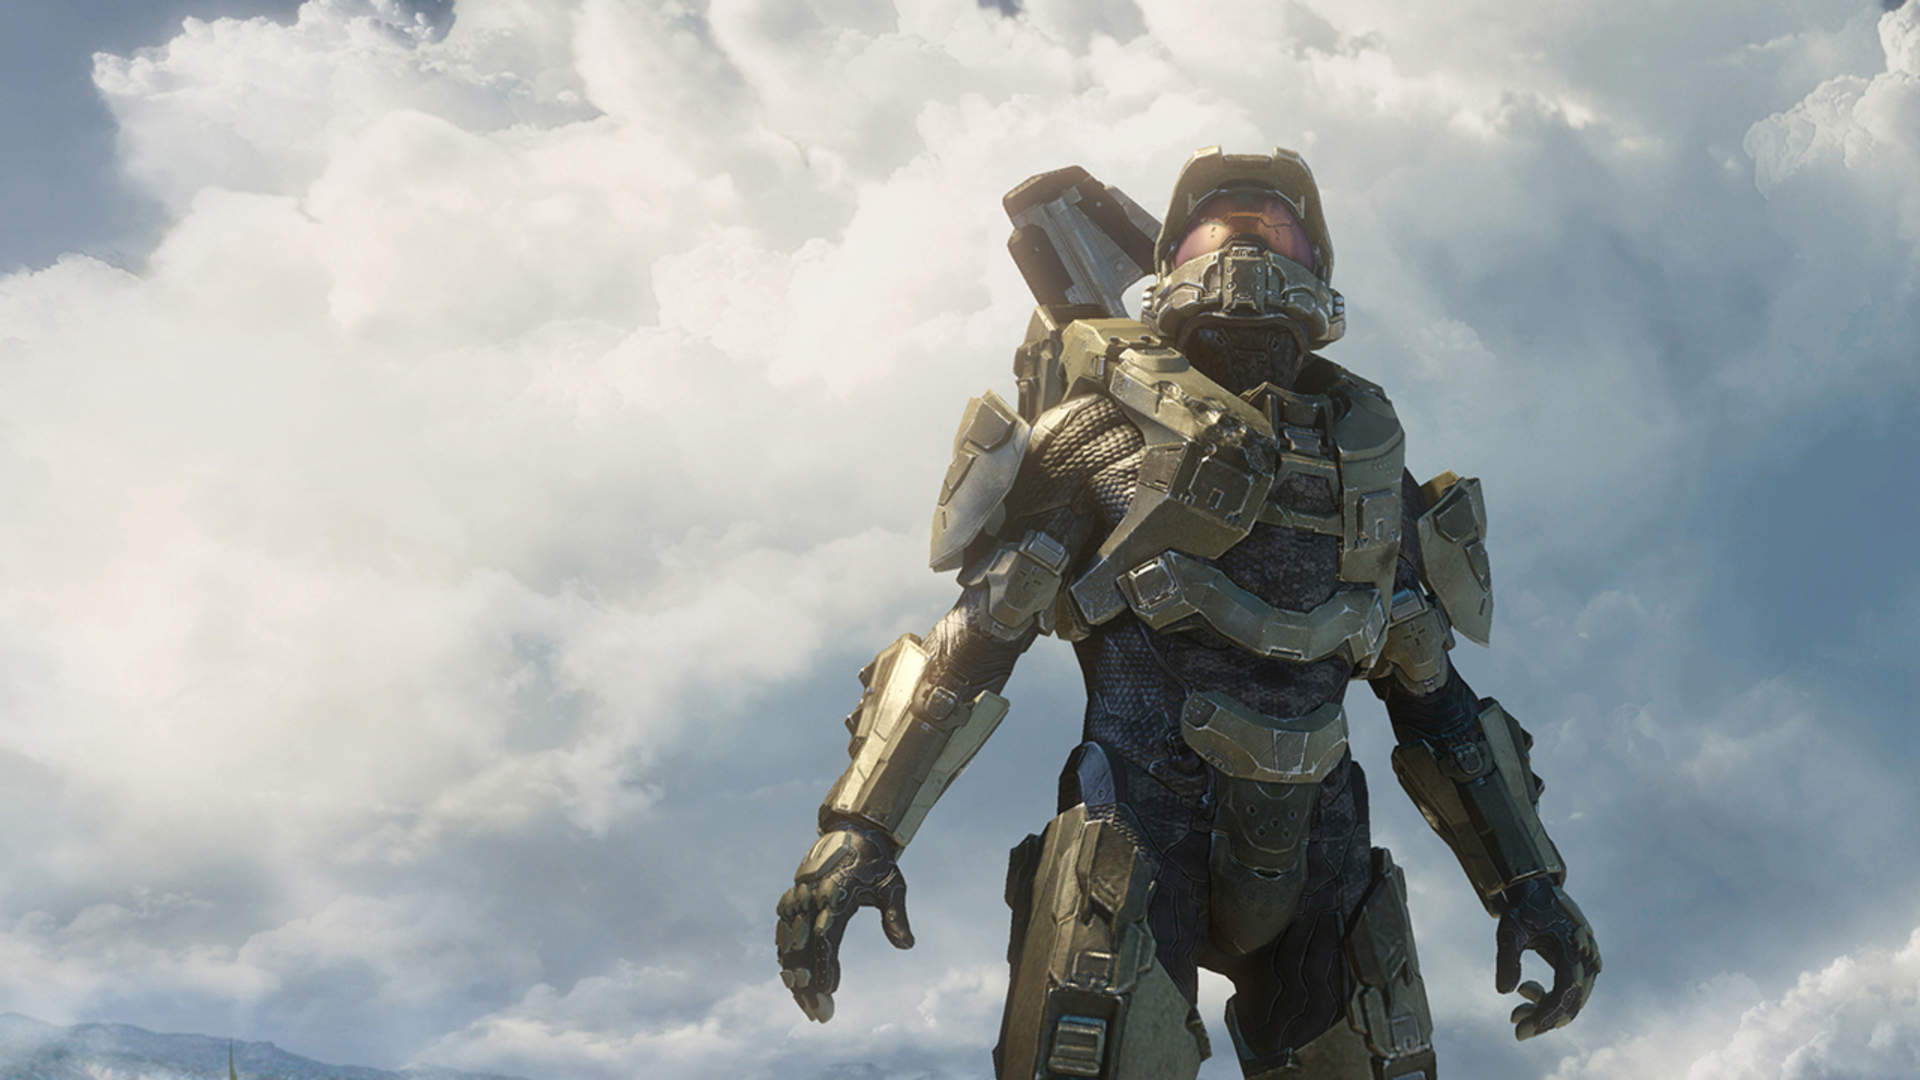 Halo 4 launch trailer produced by David Fincher, directed by Scott Pilgrim  visual effects lead - Polygon